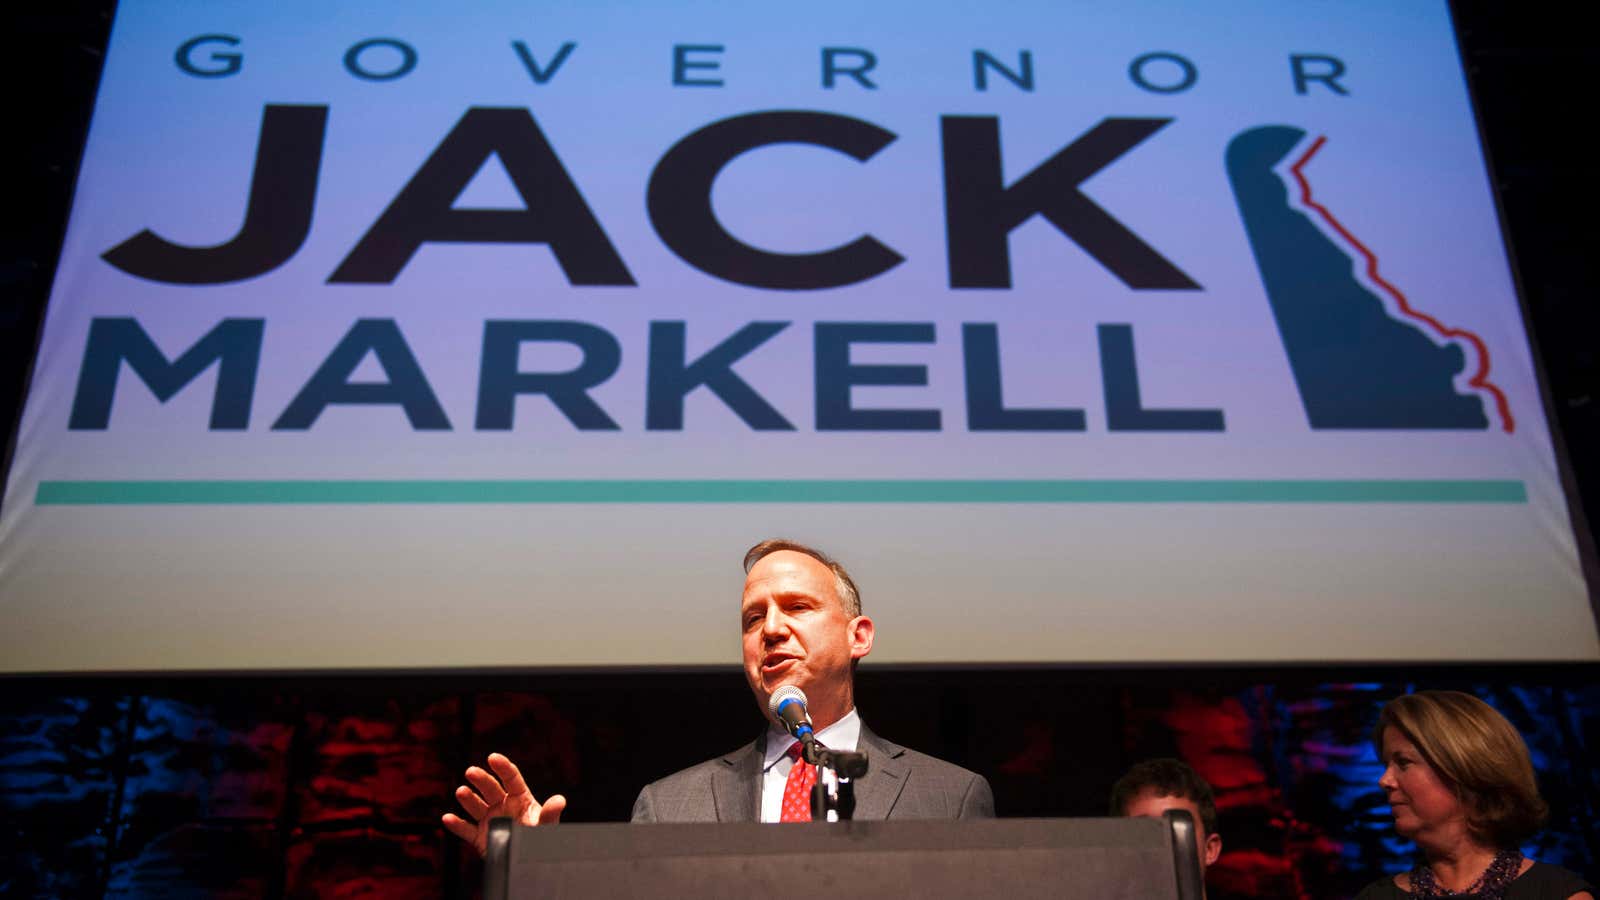 Delaware Governor Jack Markell presides over a global locus of corporate secrecy.